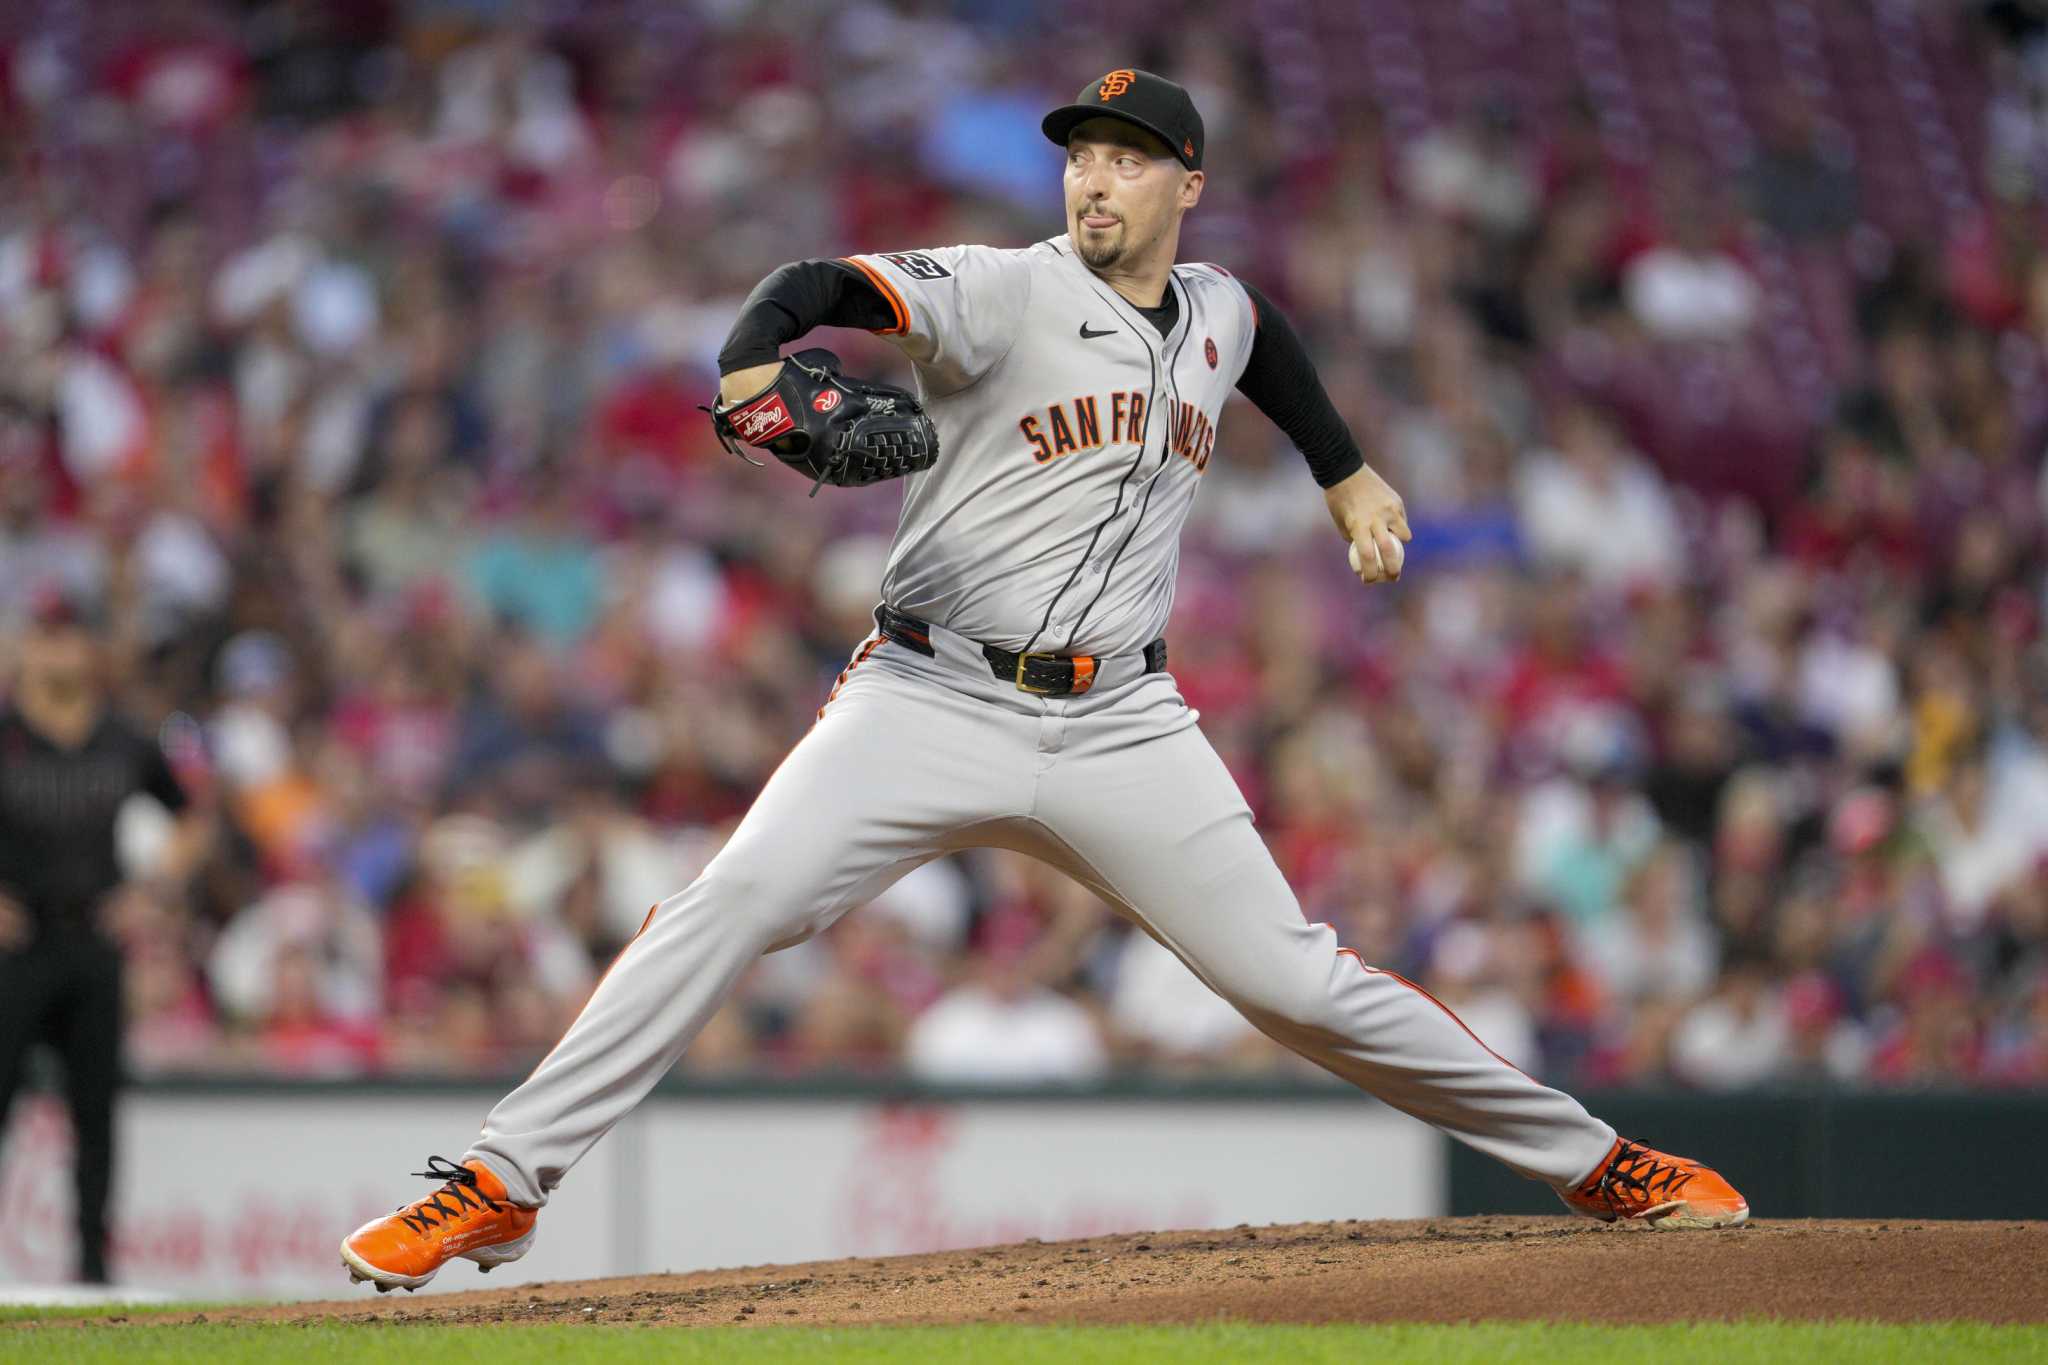 Giants' Blake Snell throws 1st career no-hitter in 3-0 win over the Reds